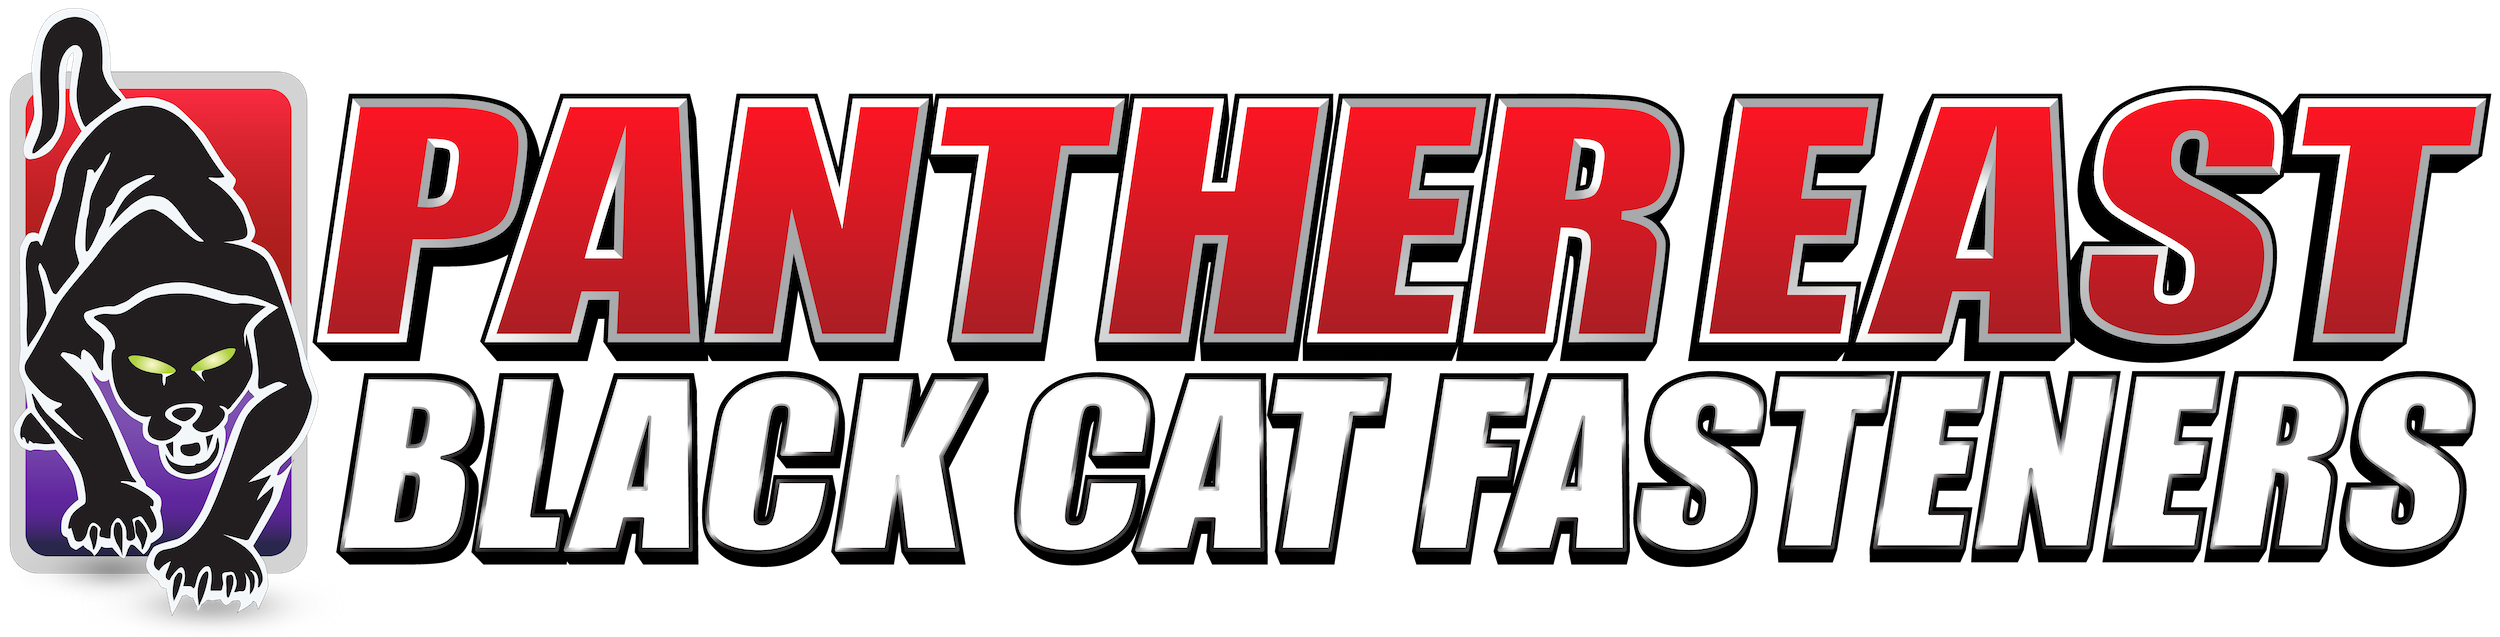 Panther East & Black Cat Fasteners Roofing & Construction Tools, Fasteners, Equipment, Safety and Material Supplies